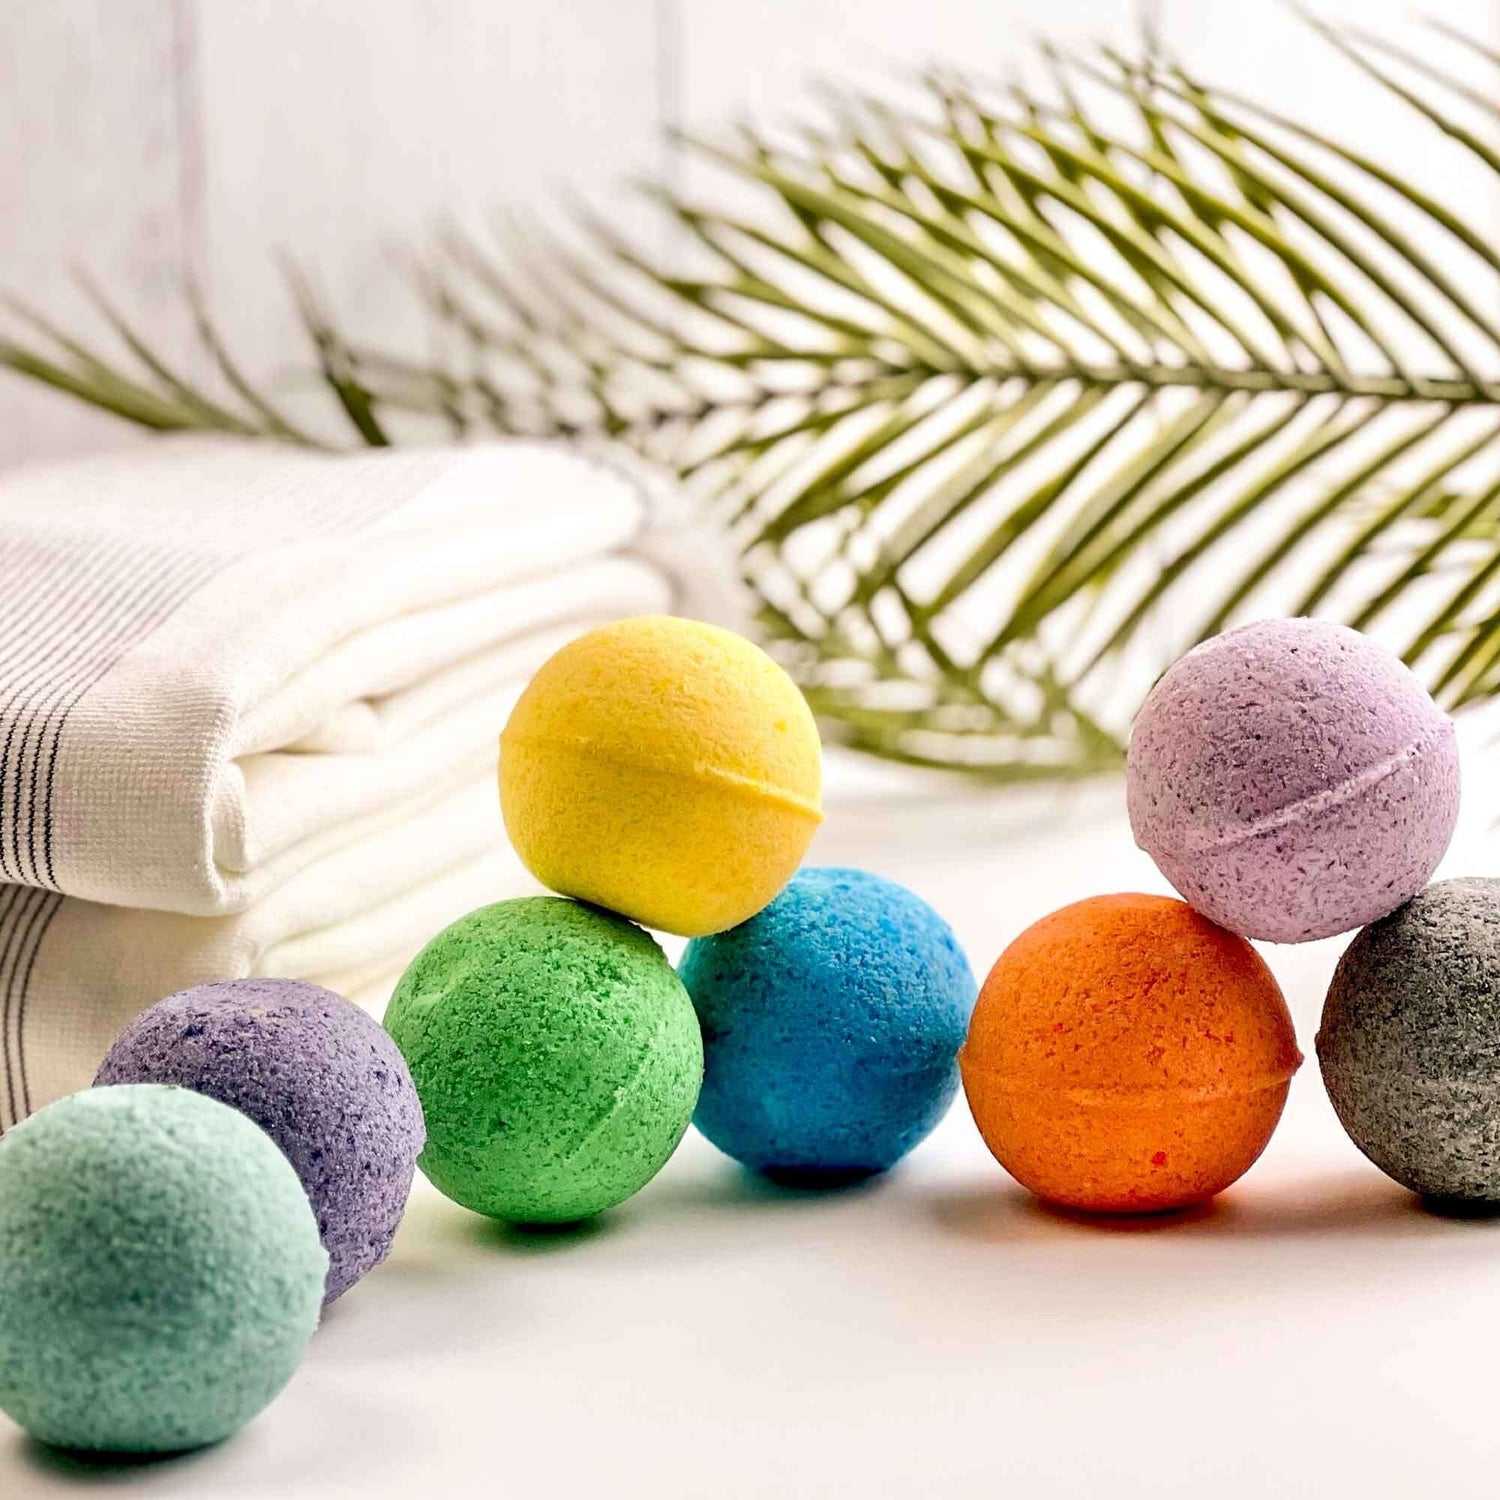 Enchant Your Senses with Love Spell Bath Bombs - Handmade with All-Natural Ingredients for a Luxurious Bath Experience